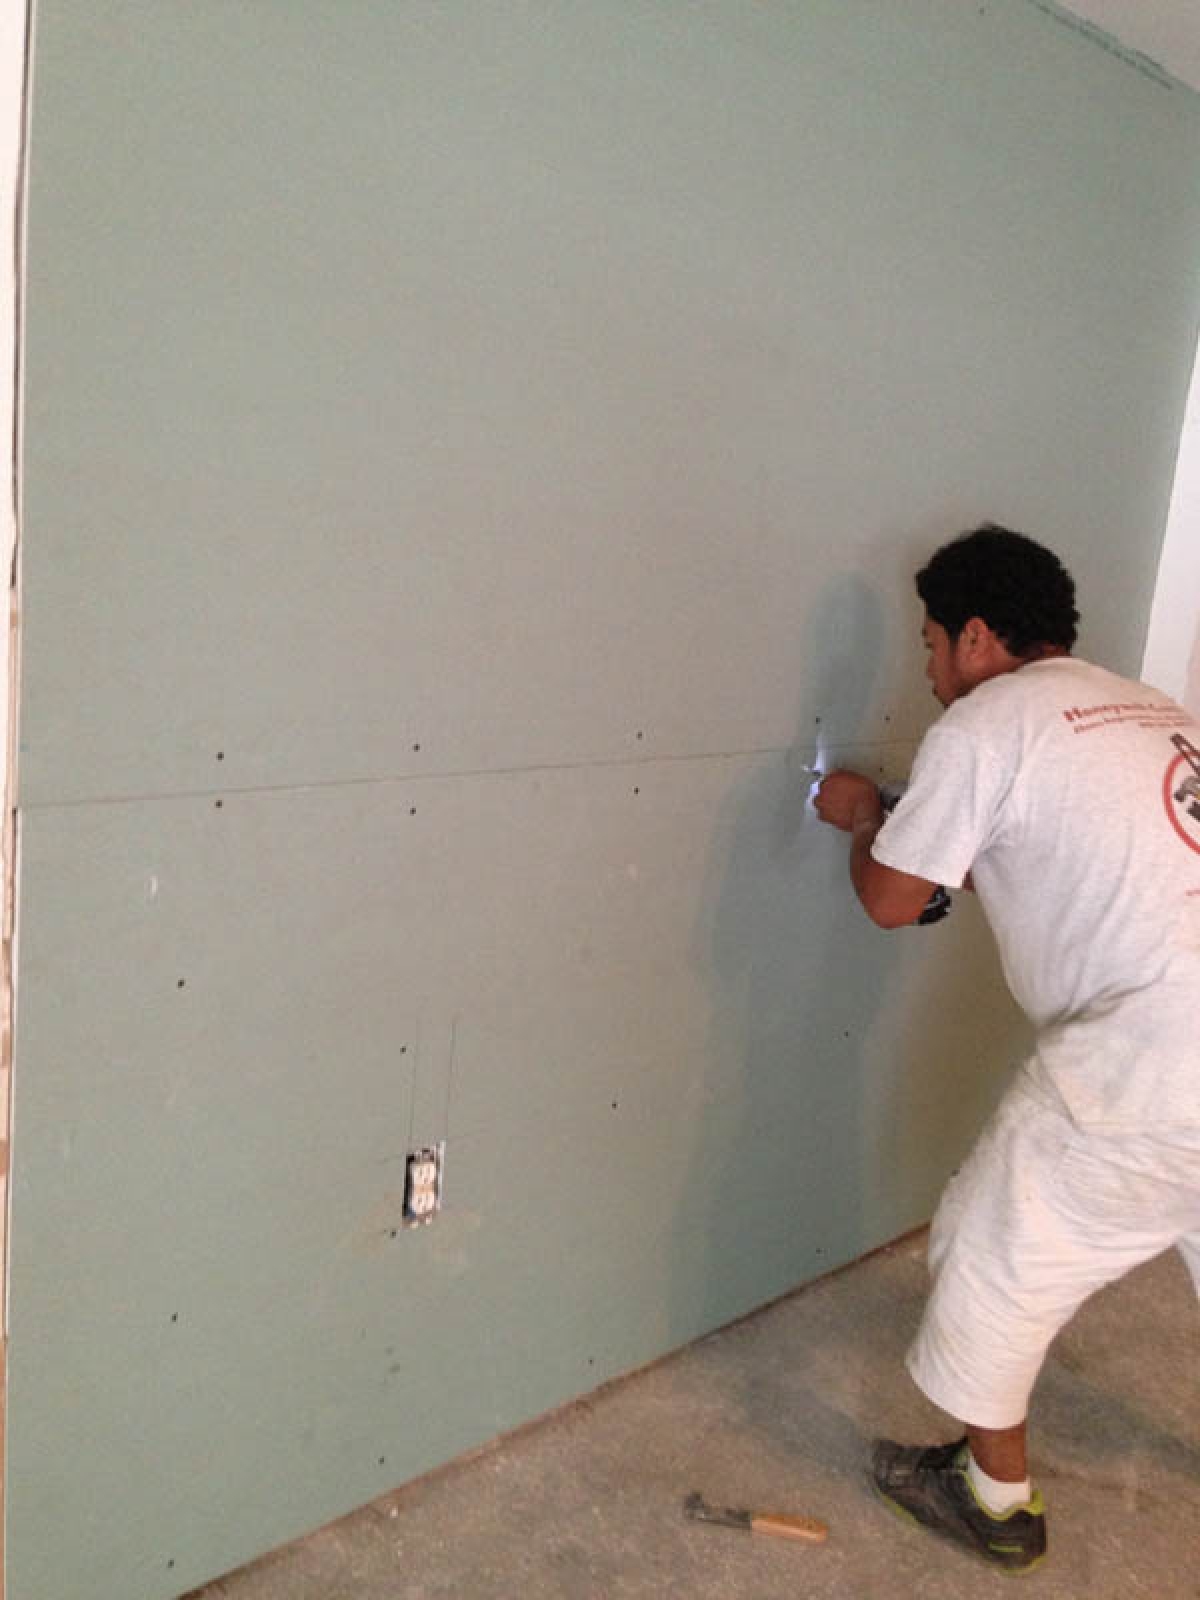 DRYWALL WORK PROJECT